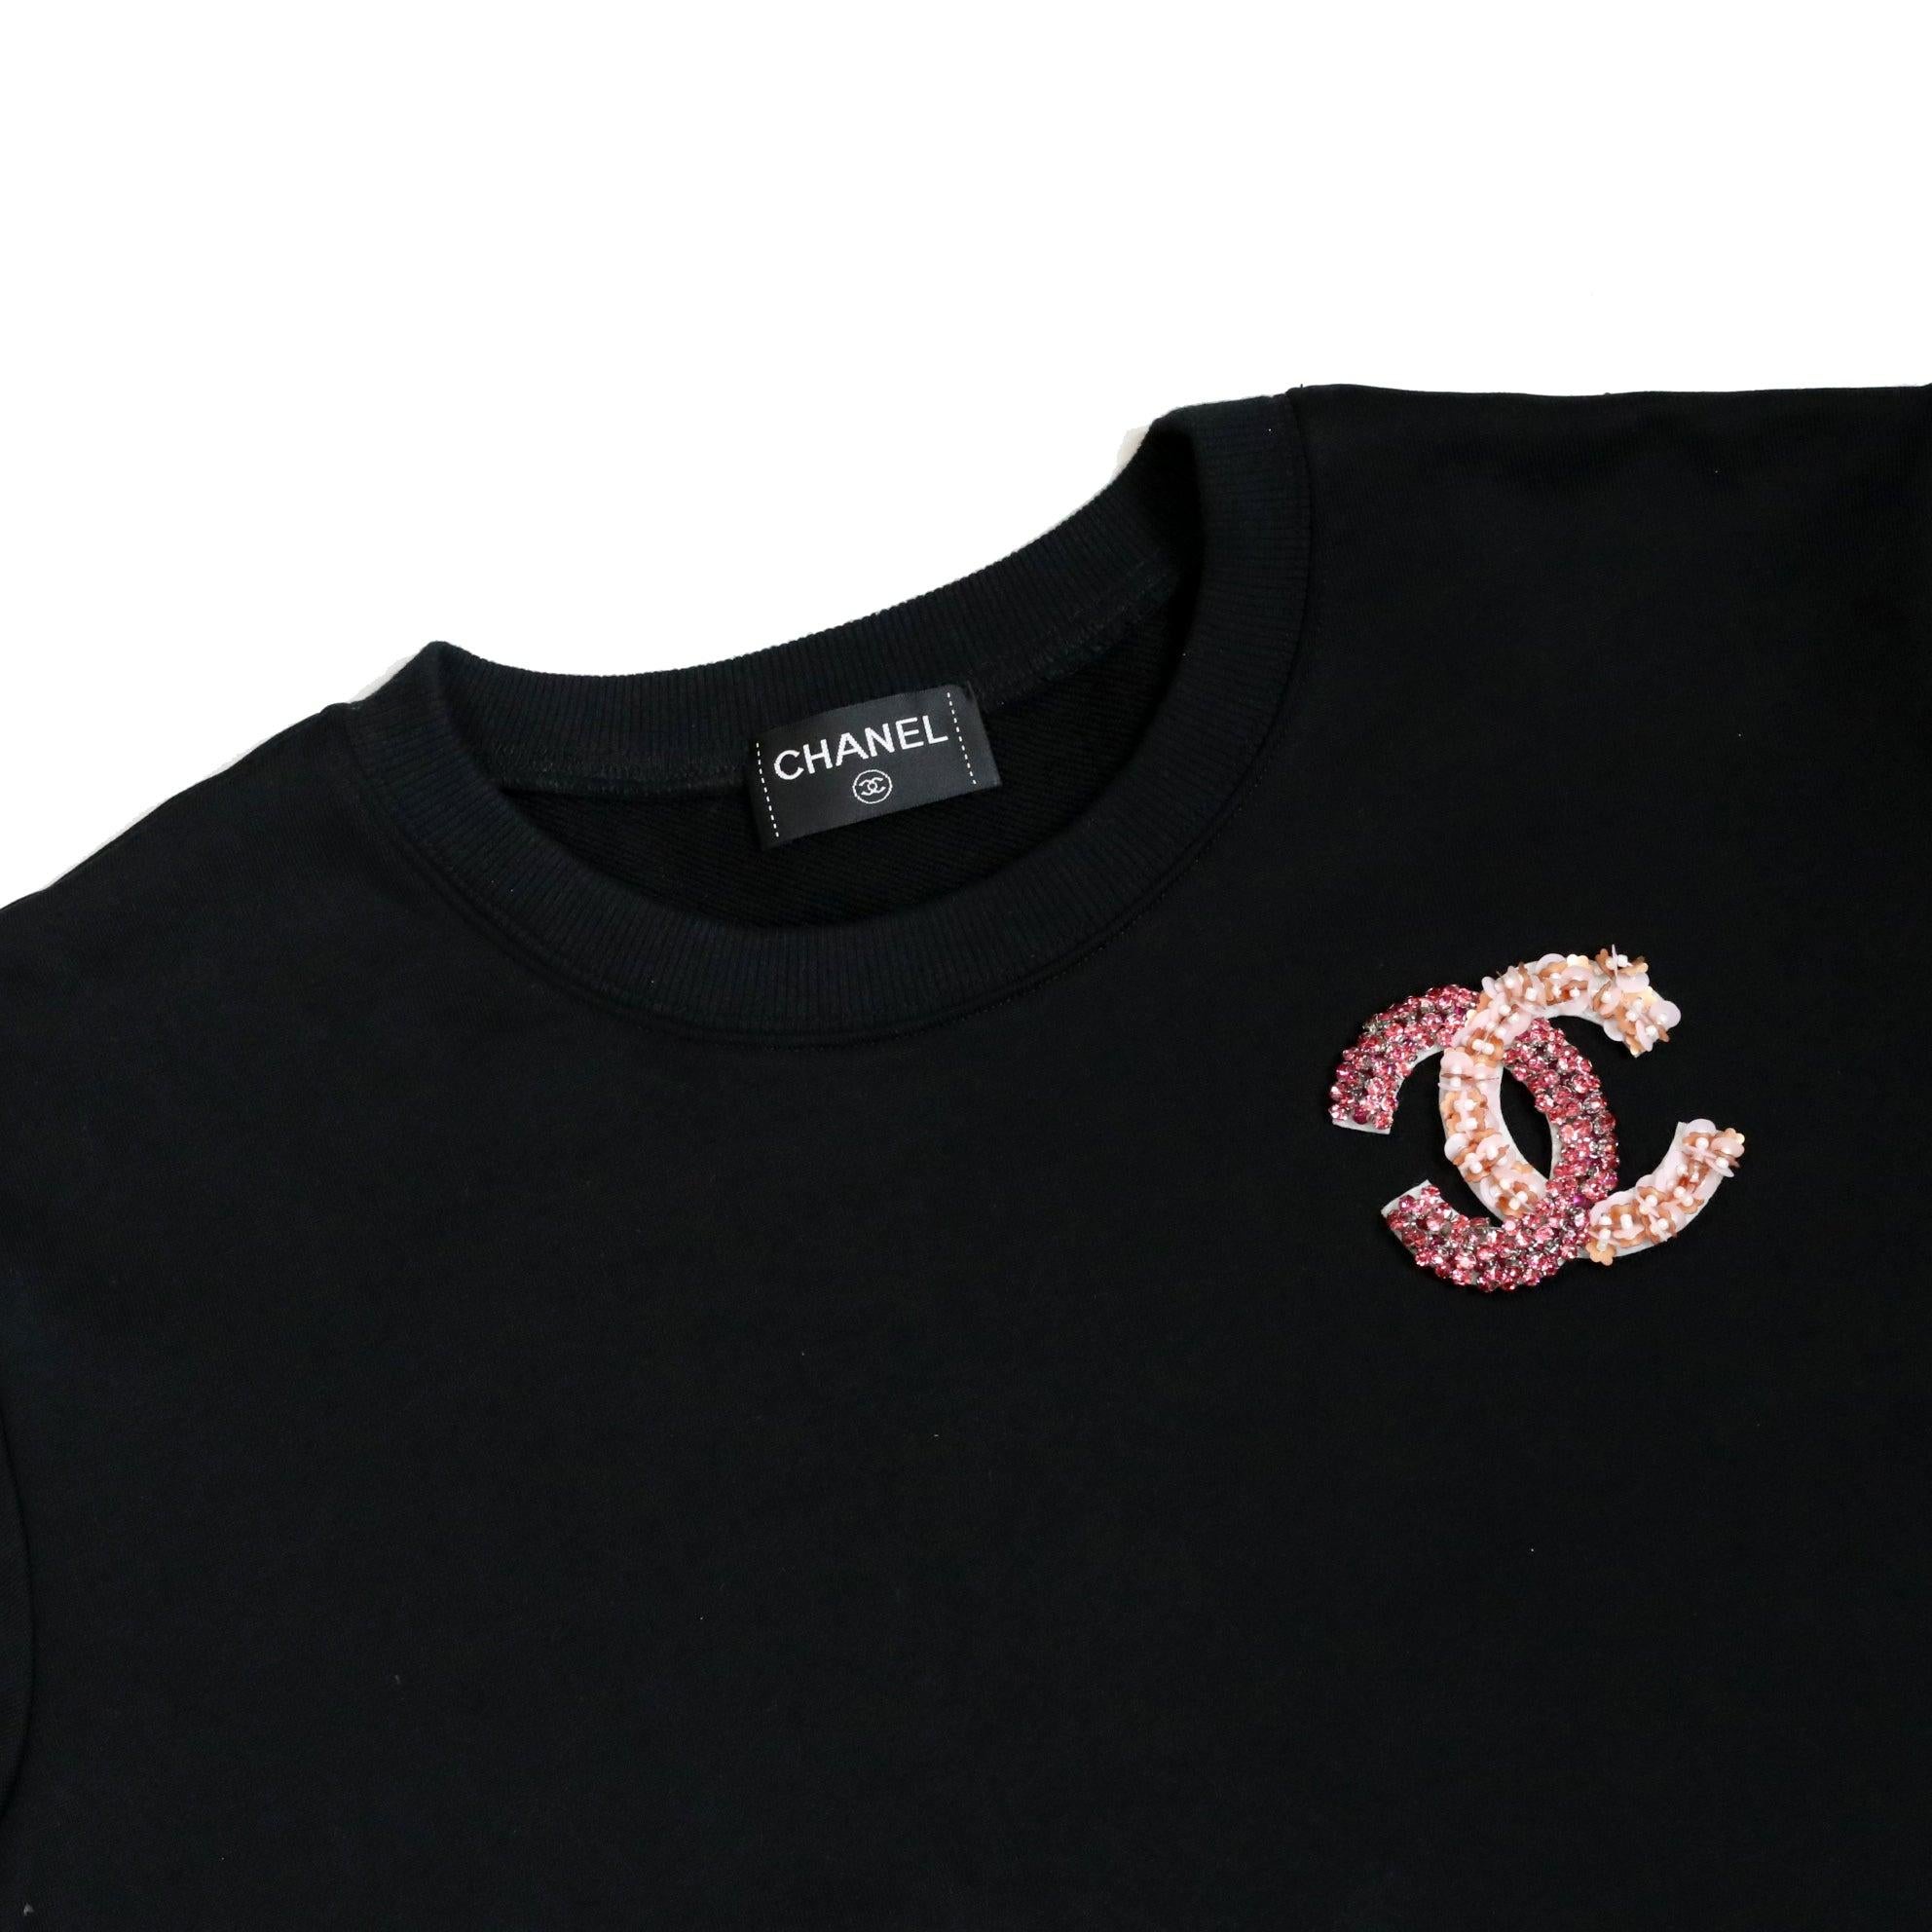 You will make a bold and stylish statement when you wear this Chanel sweater.

This Chanel sweater is made with luxurious black premium soft cotton and features exquisite embroidered diamond and crystal lurex flowers to showcase the signature CC